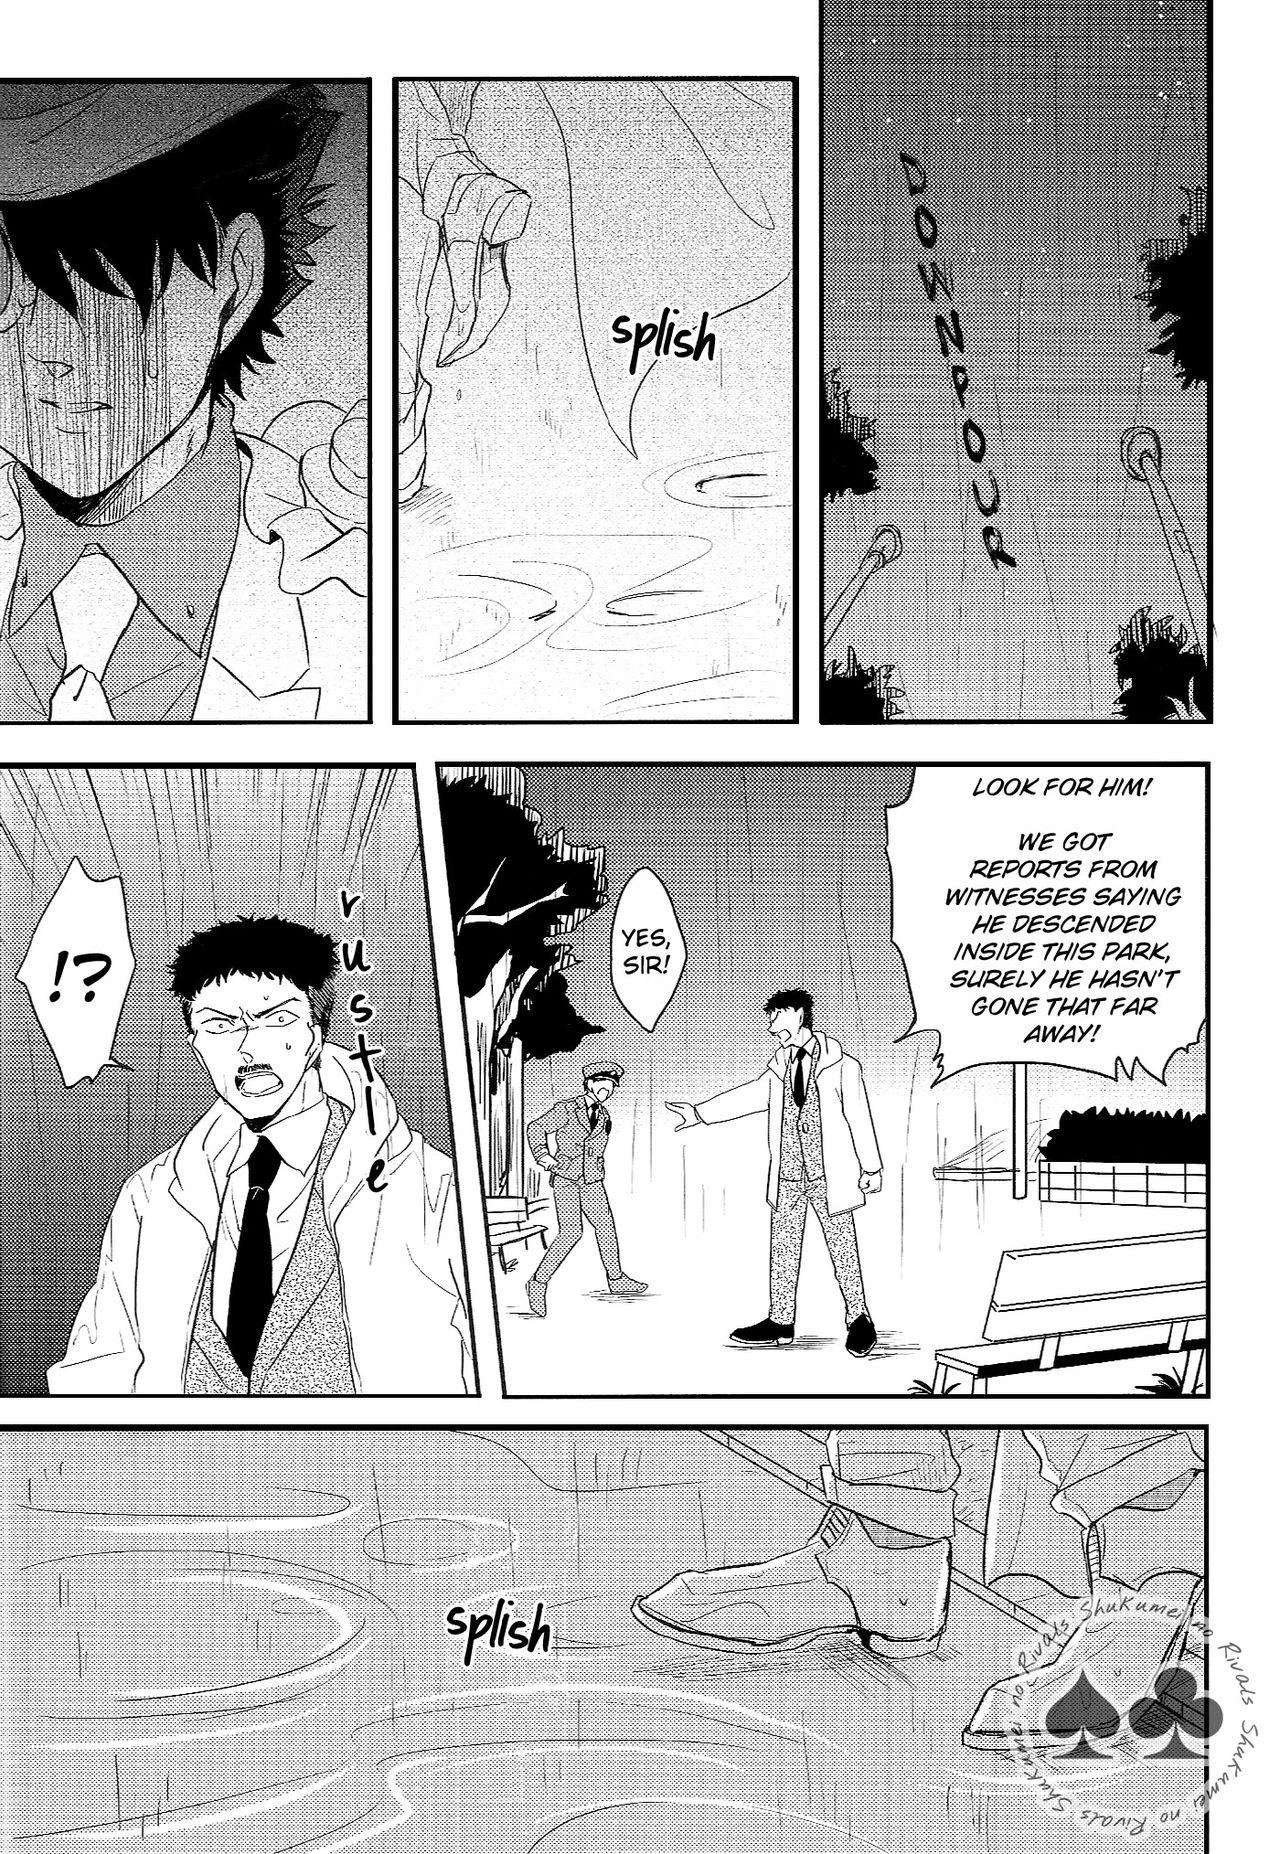 Shy Answer Is Near - Detective conan Gay Military - Page 10